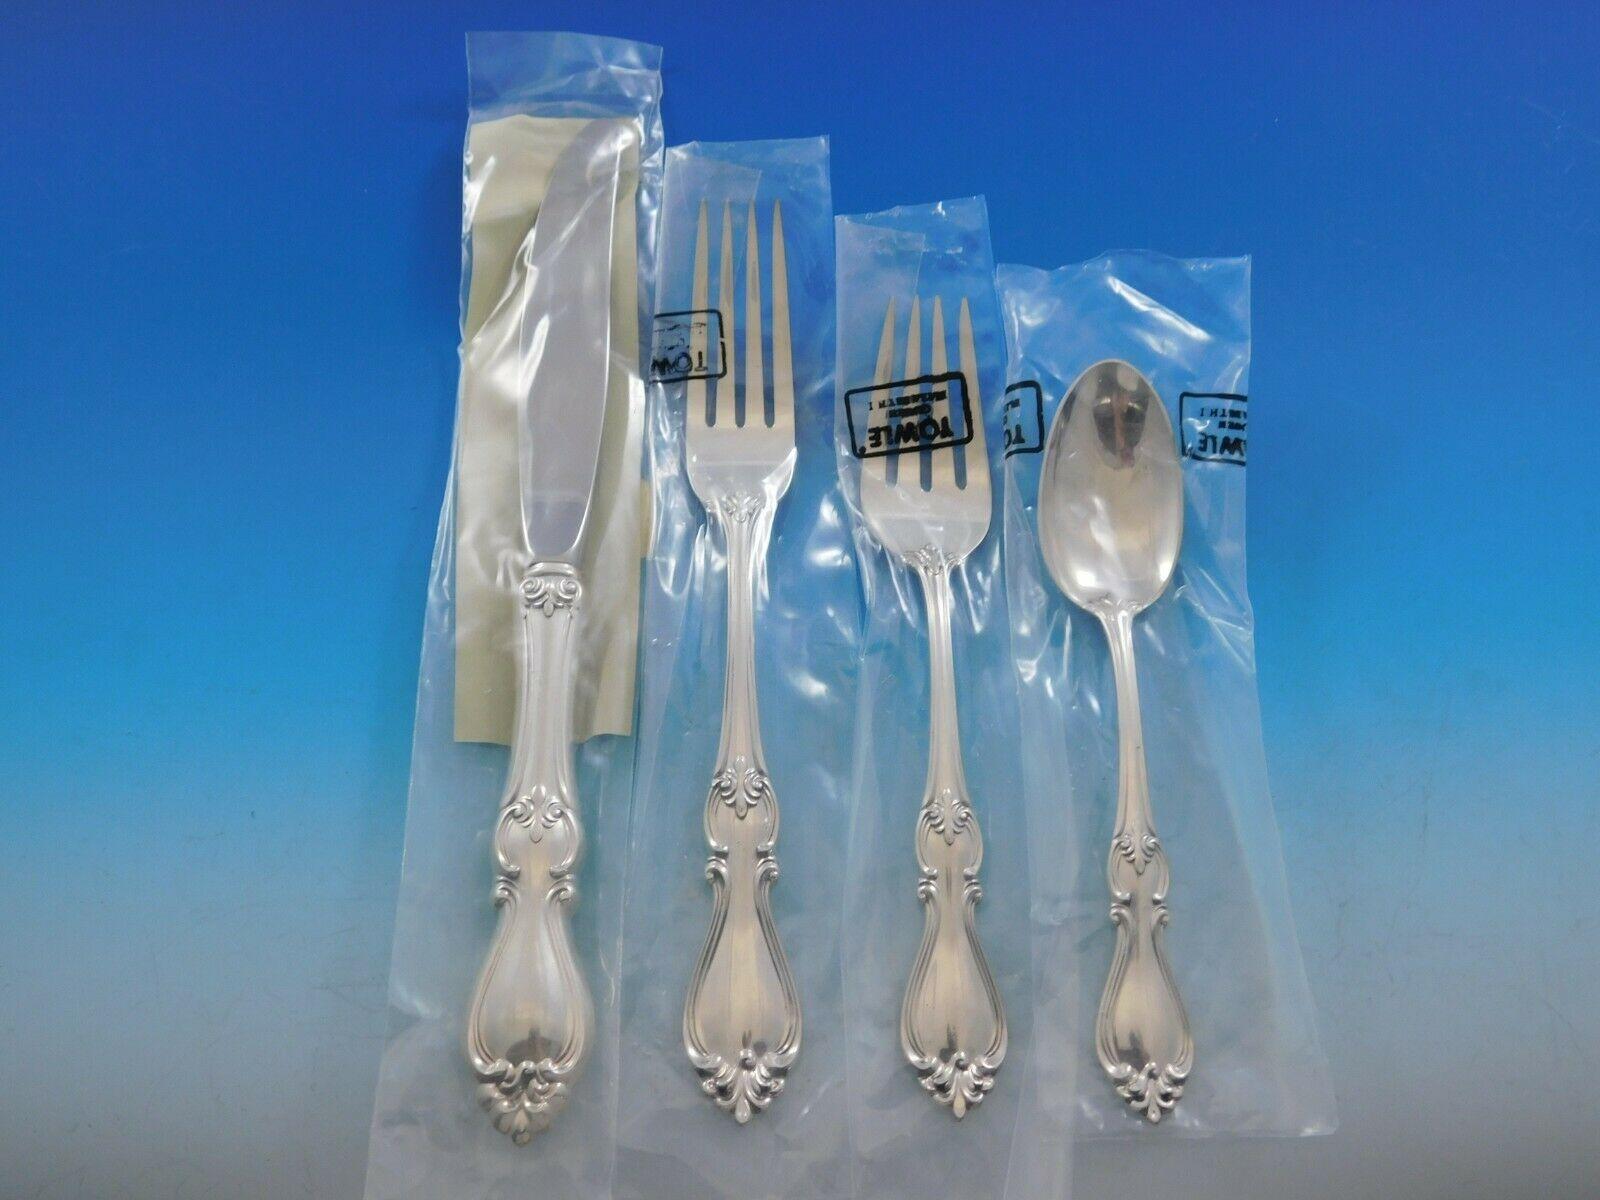 New, unused Queen Elizabeth I by Towle sterling silver flatware set, 54 pieces. This set includes:

12 place knives, 9